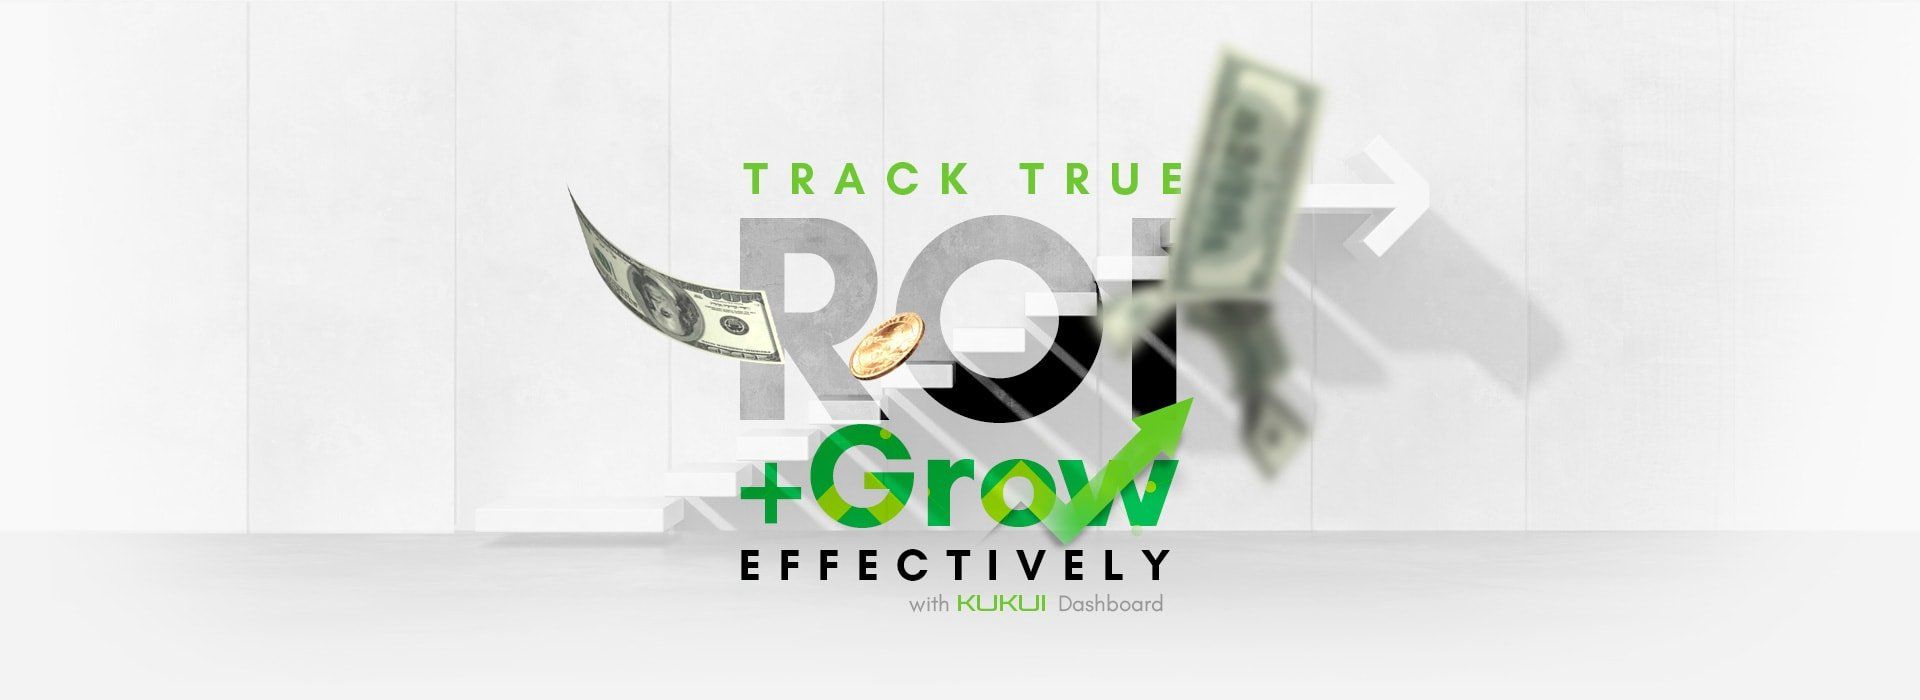 A logo for a company that says `` track true roi + grow effectively ''